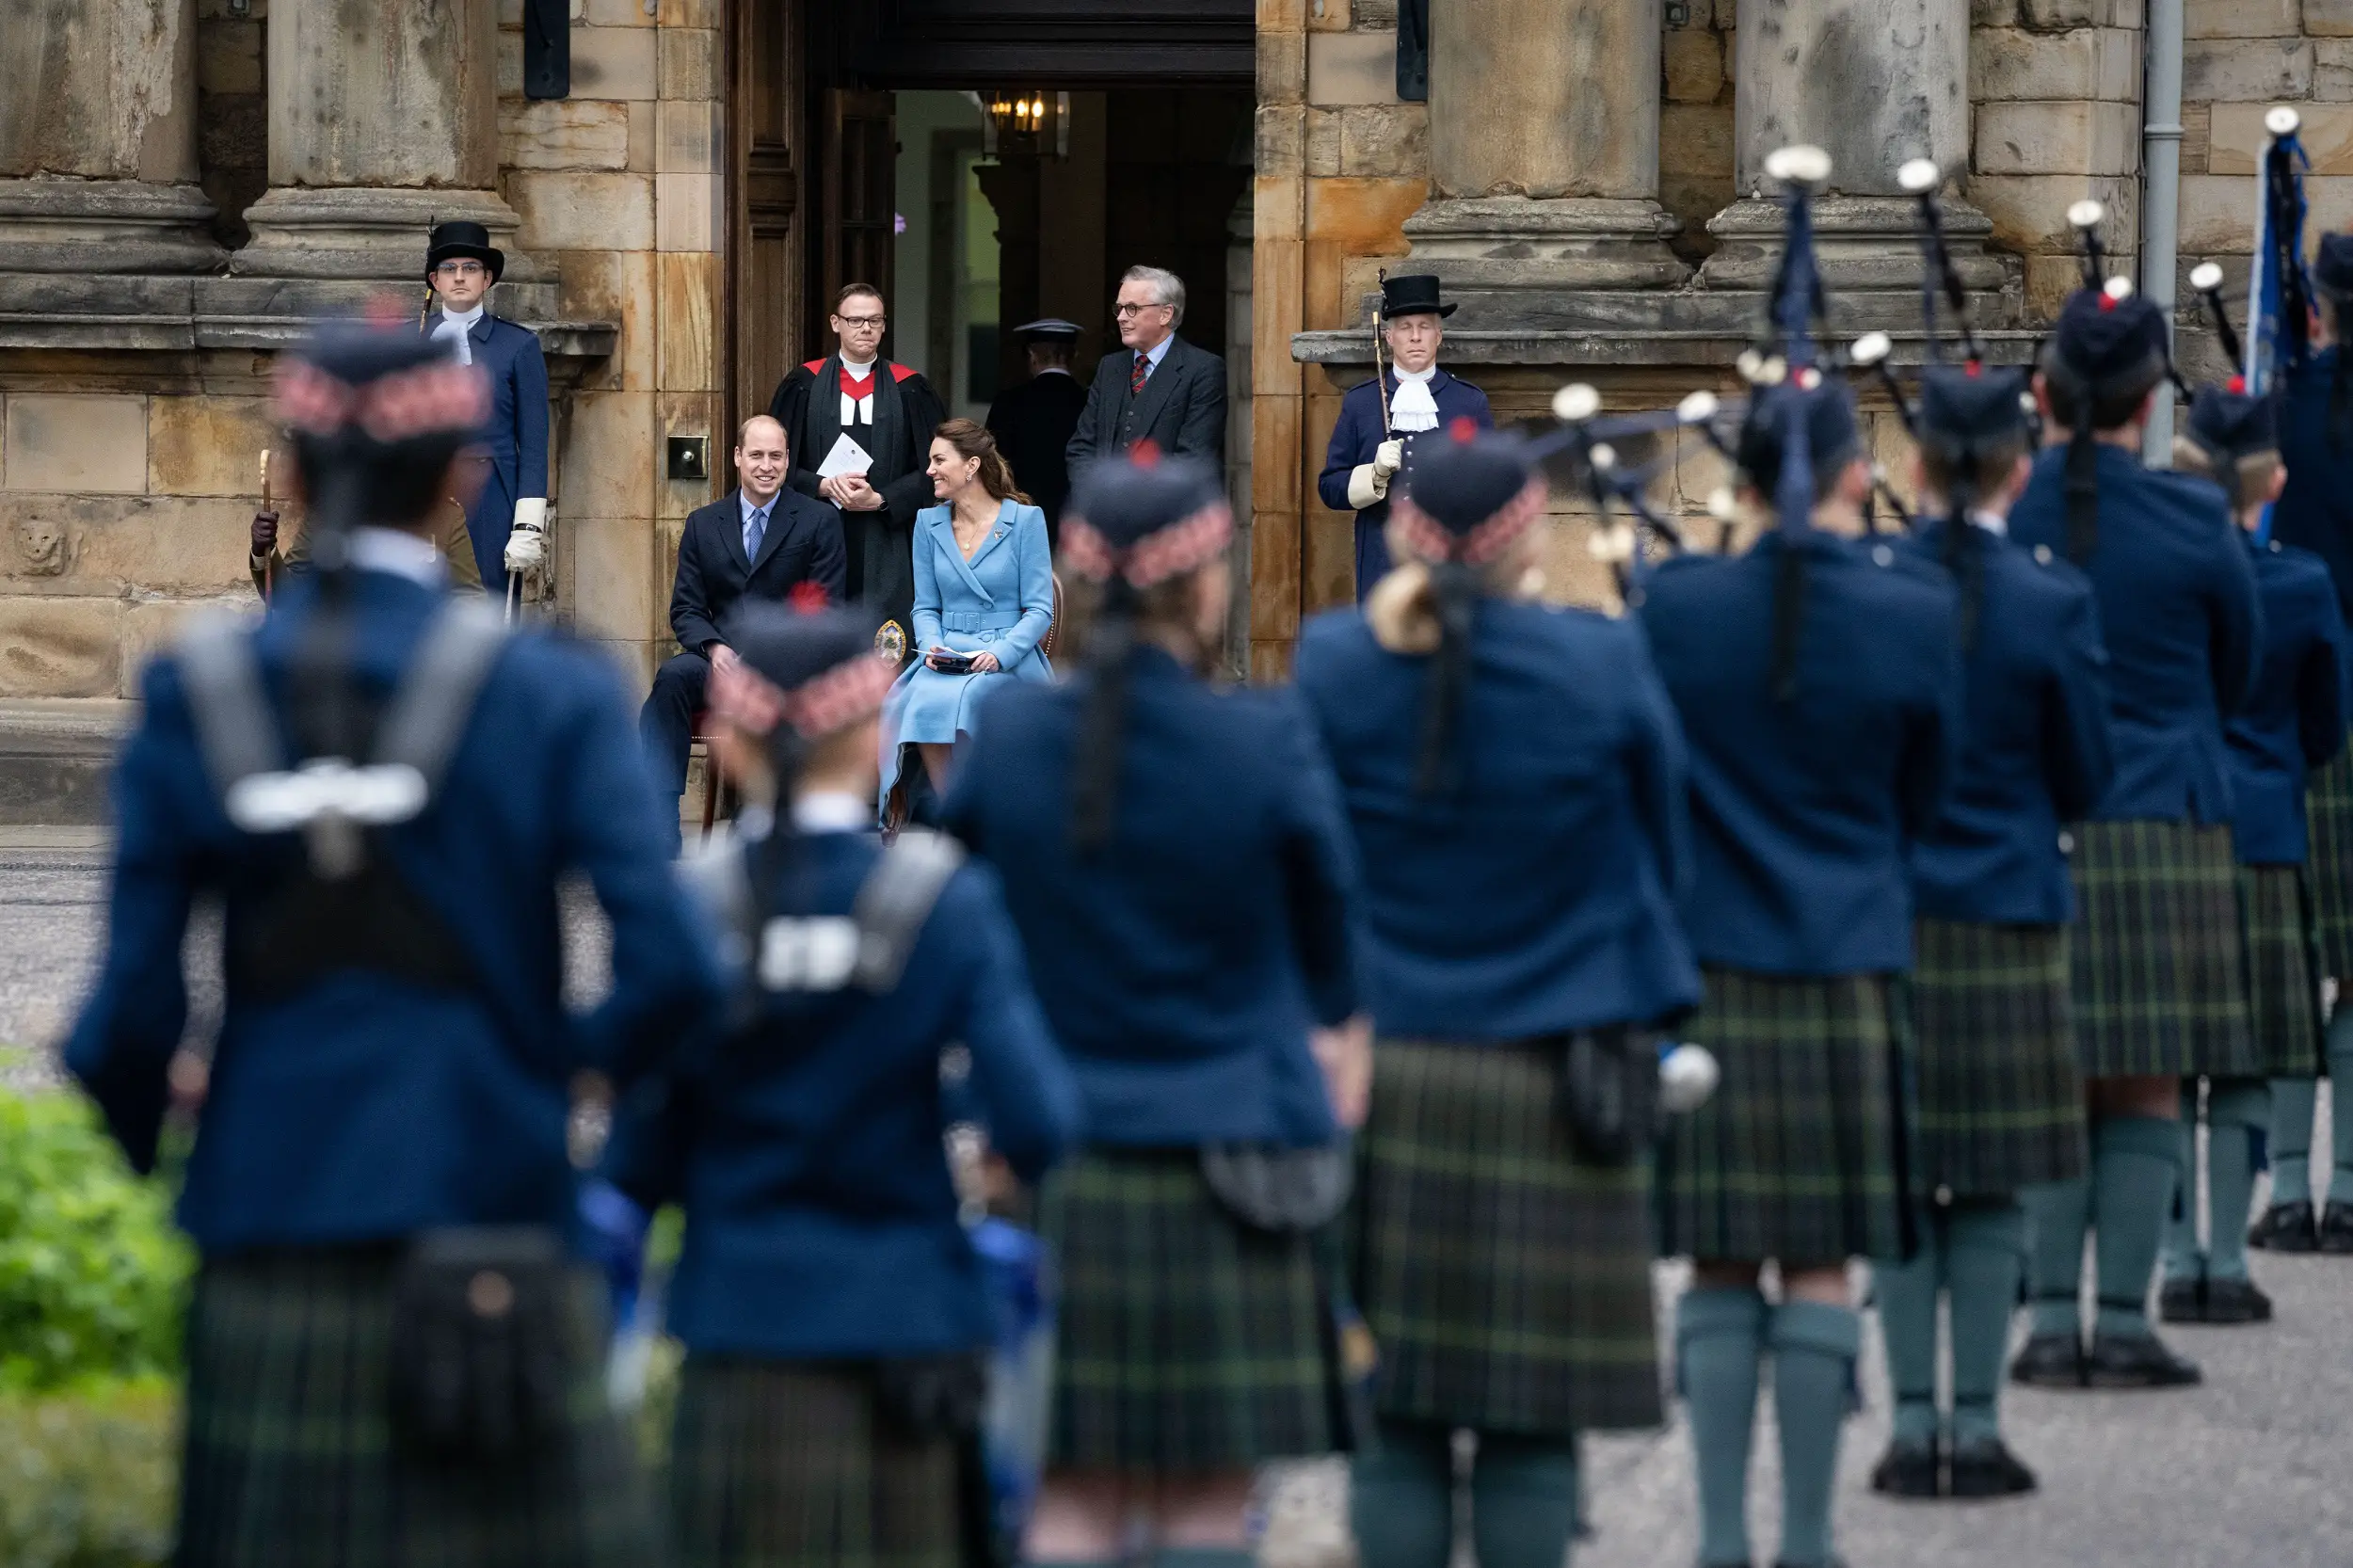 The Duke and Duchess of Cambridge attended a Beating Retreat by The Massed Pipes and Drums of the Combined Cadet Force in Scotland at the Palace of Holyroodhouse.